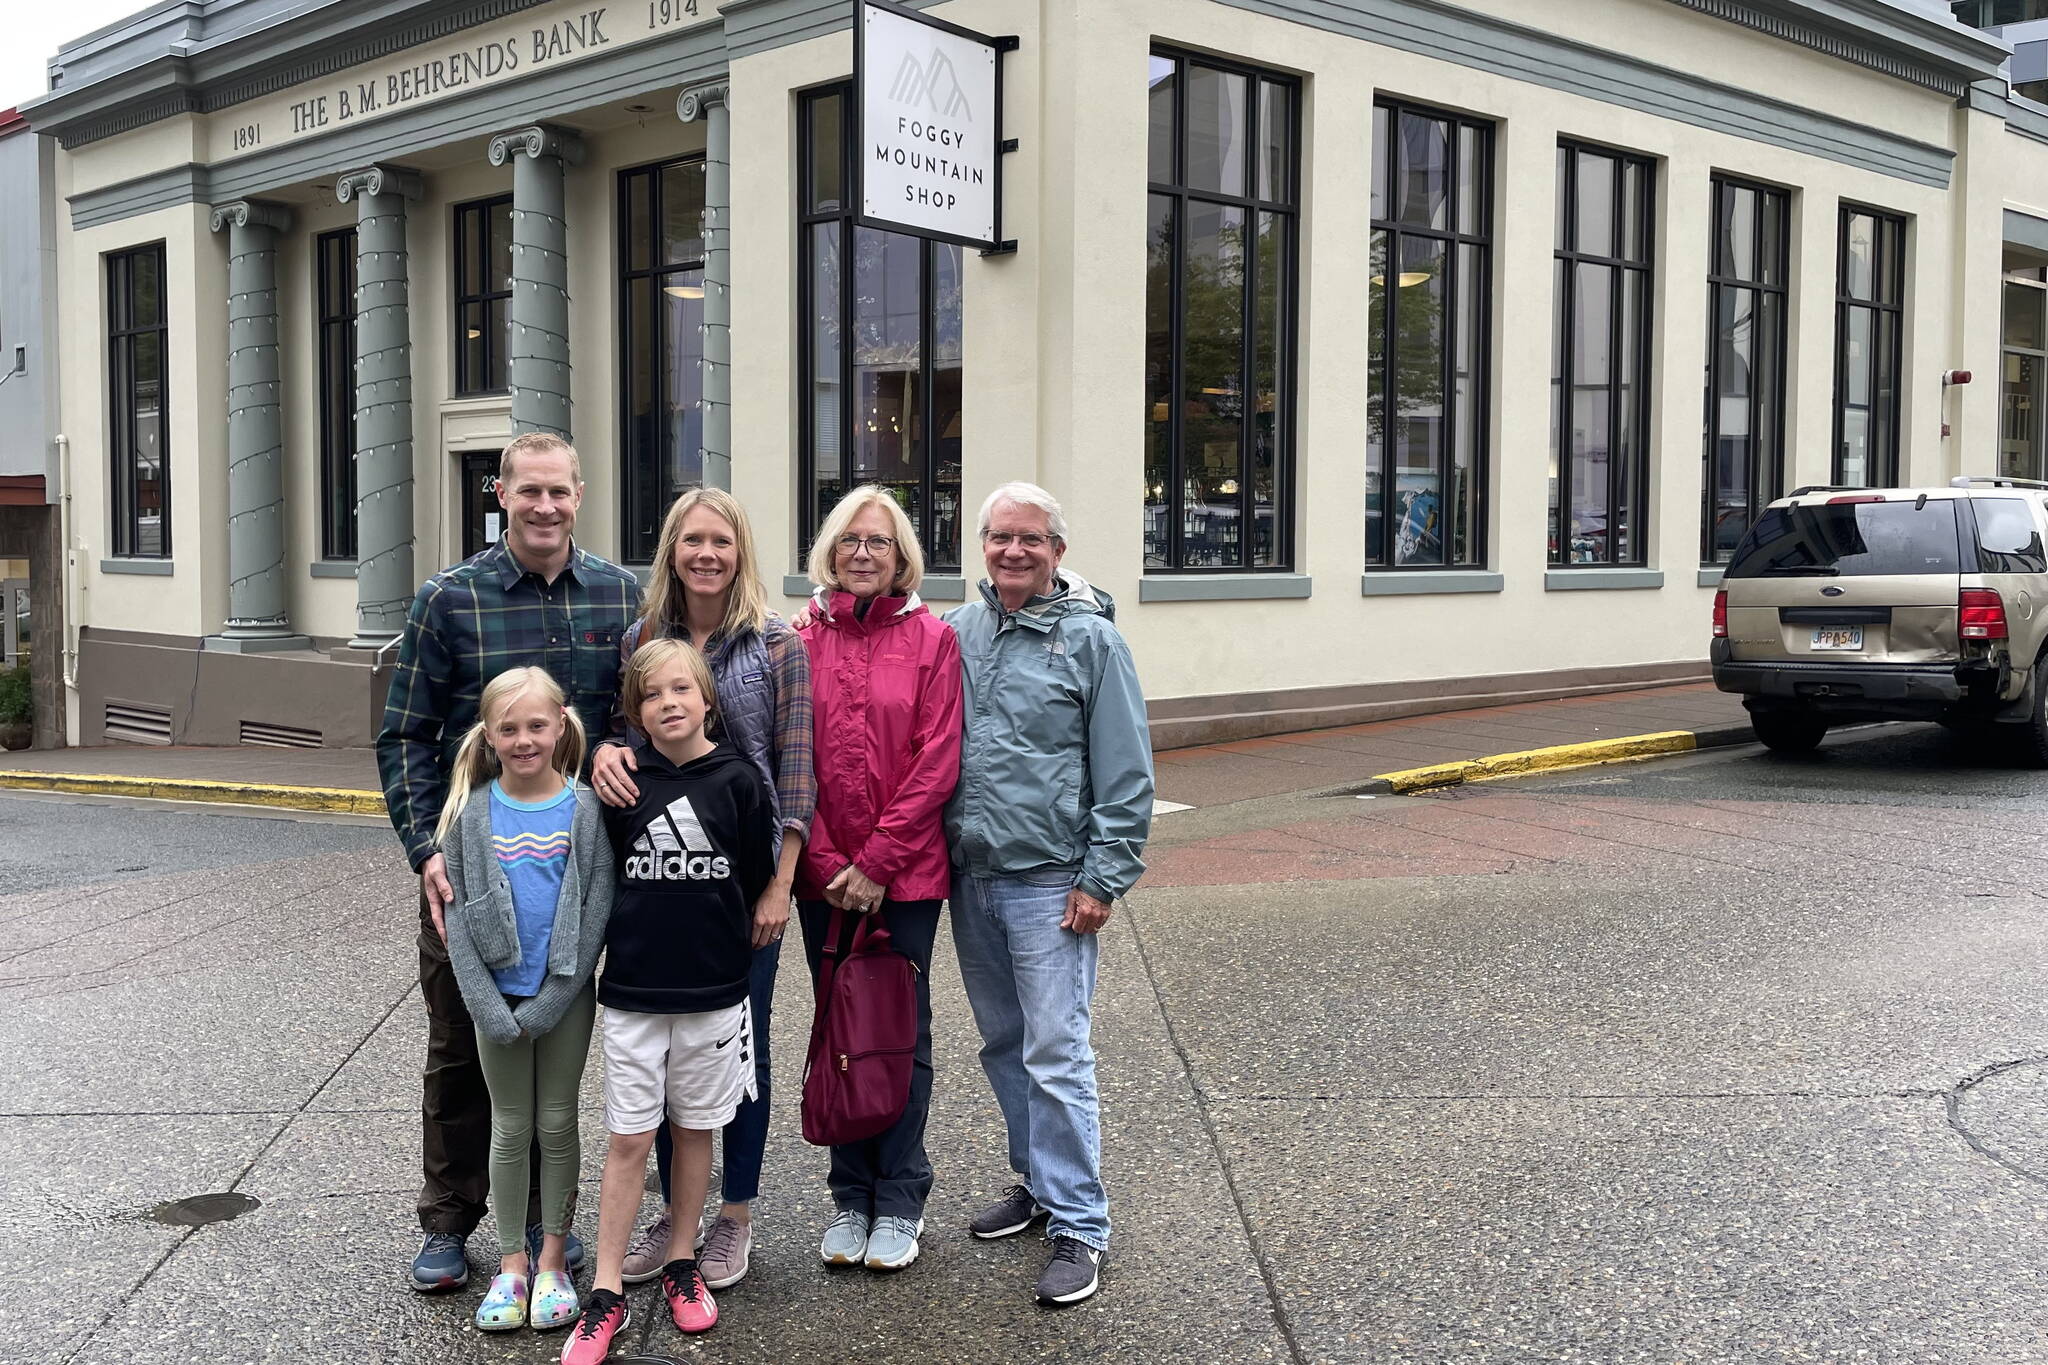 Three generations of the Behrends-Gruening family stand outside the bank founded by B.M. Behrends. Standing from left: Jack Vines, Caroline Gruening Vines, Anne Gruening (great-granddaughter of B.M. Behrends), and Win Gruening (grandson of Governor and Senator Ernest Gruening). Young Norah and Jack Vines stand in front. Photo by Laurie Craig